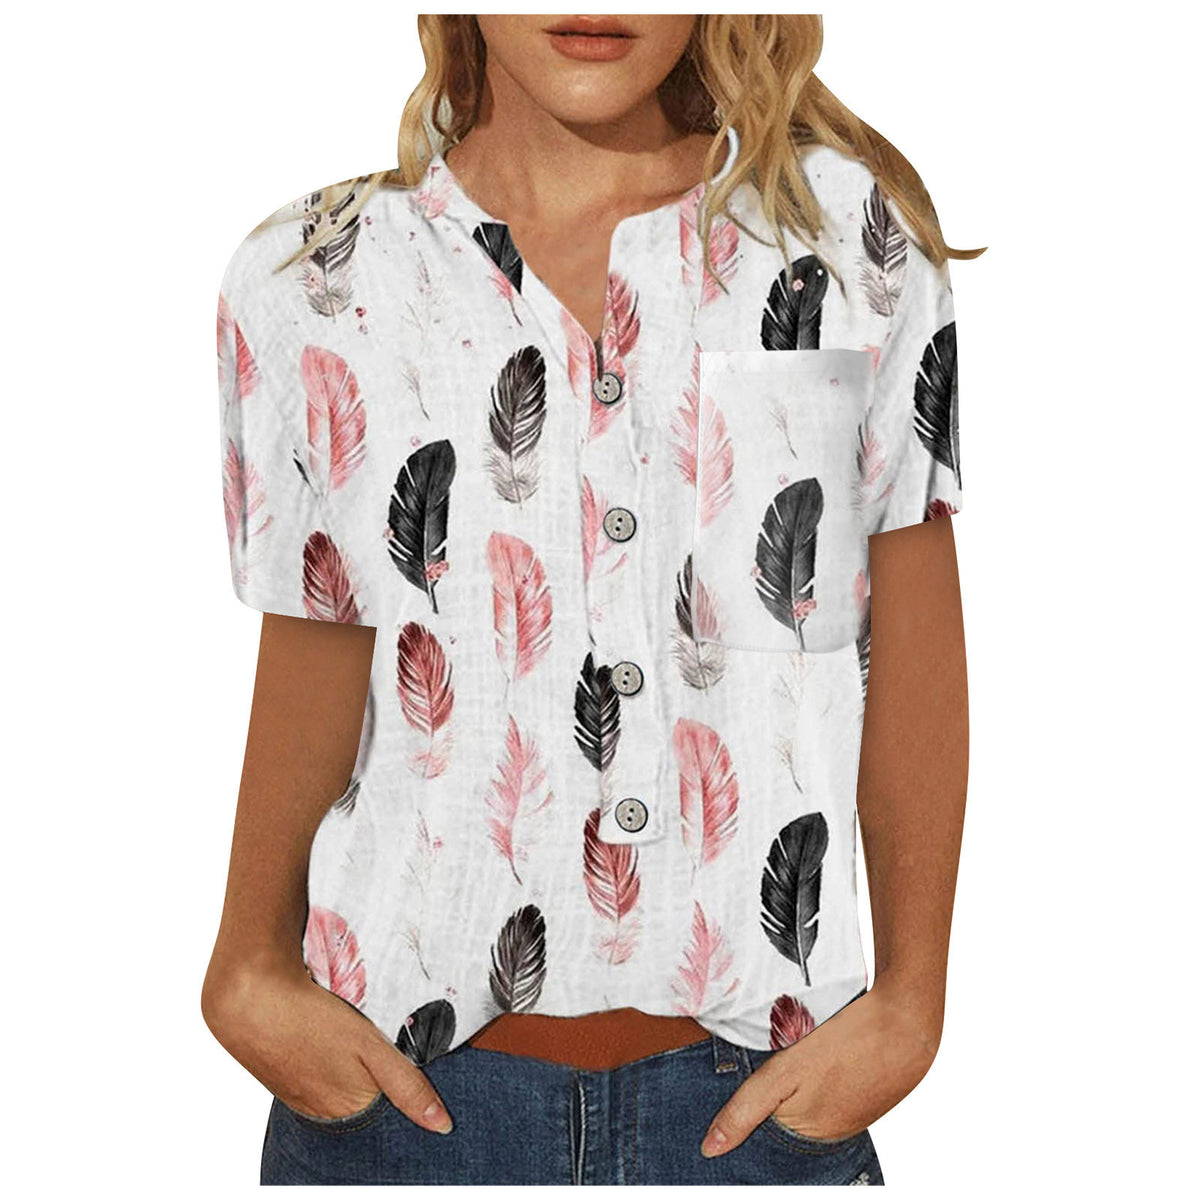 Women's Printed Loose Shirt Casual Village Leaf Tops